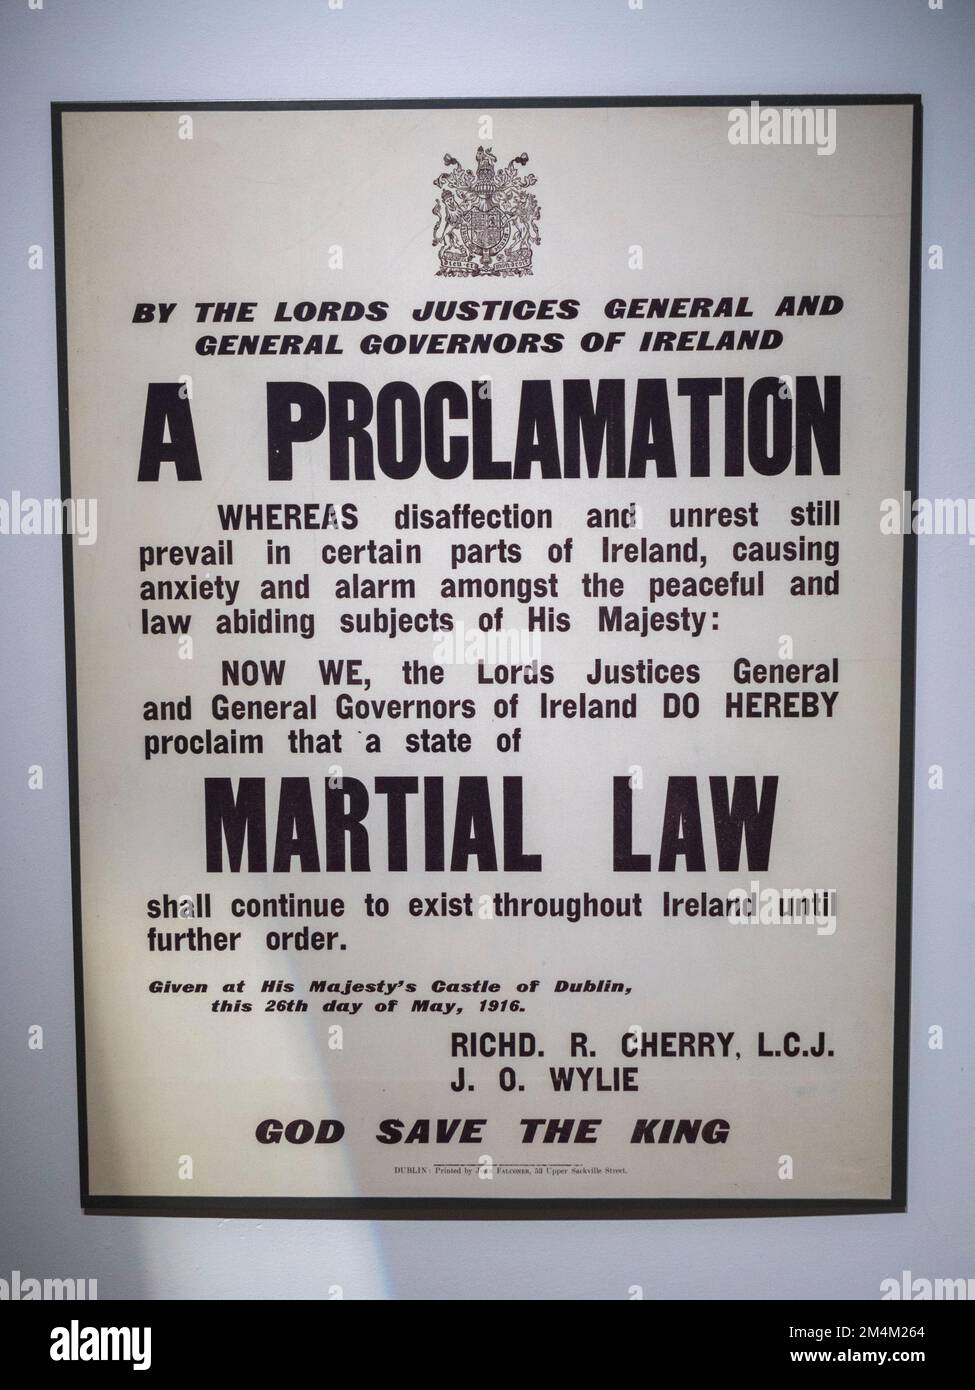 The proclamation which confirmed martial law (rule by the Army)  in Ireland following the Easter Rising, Imperial War Museum, London, UK. Stock Photo